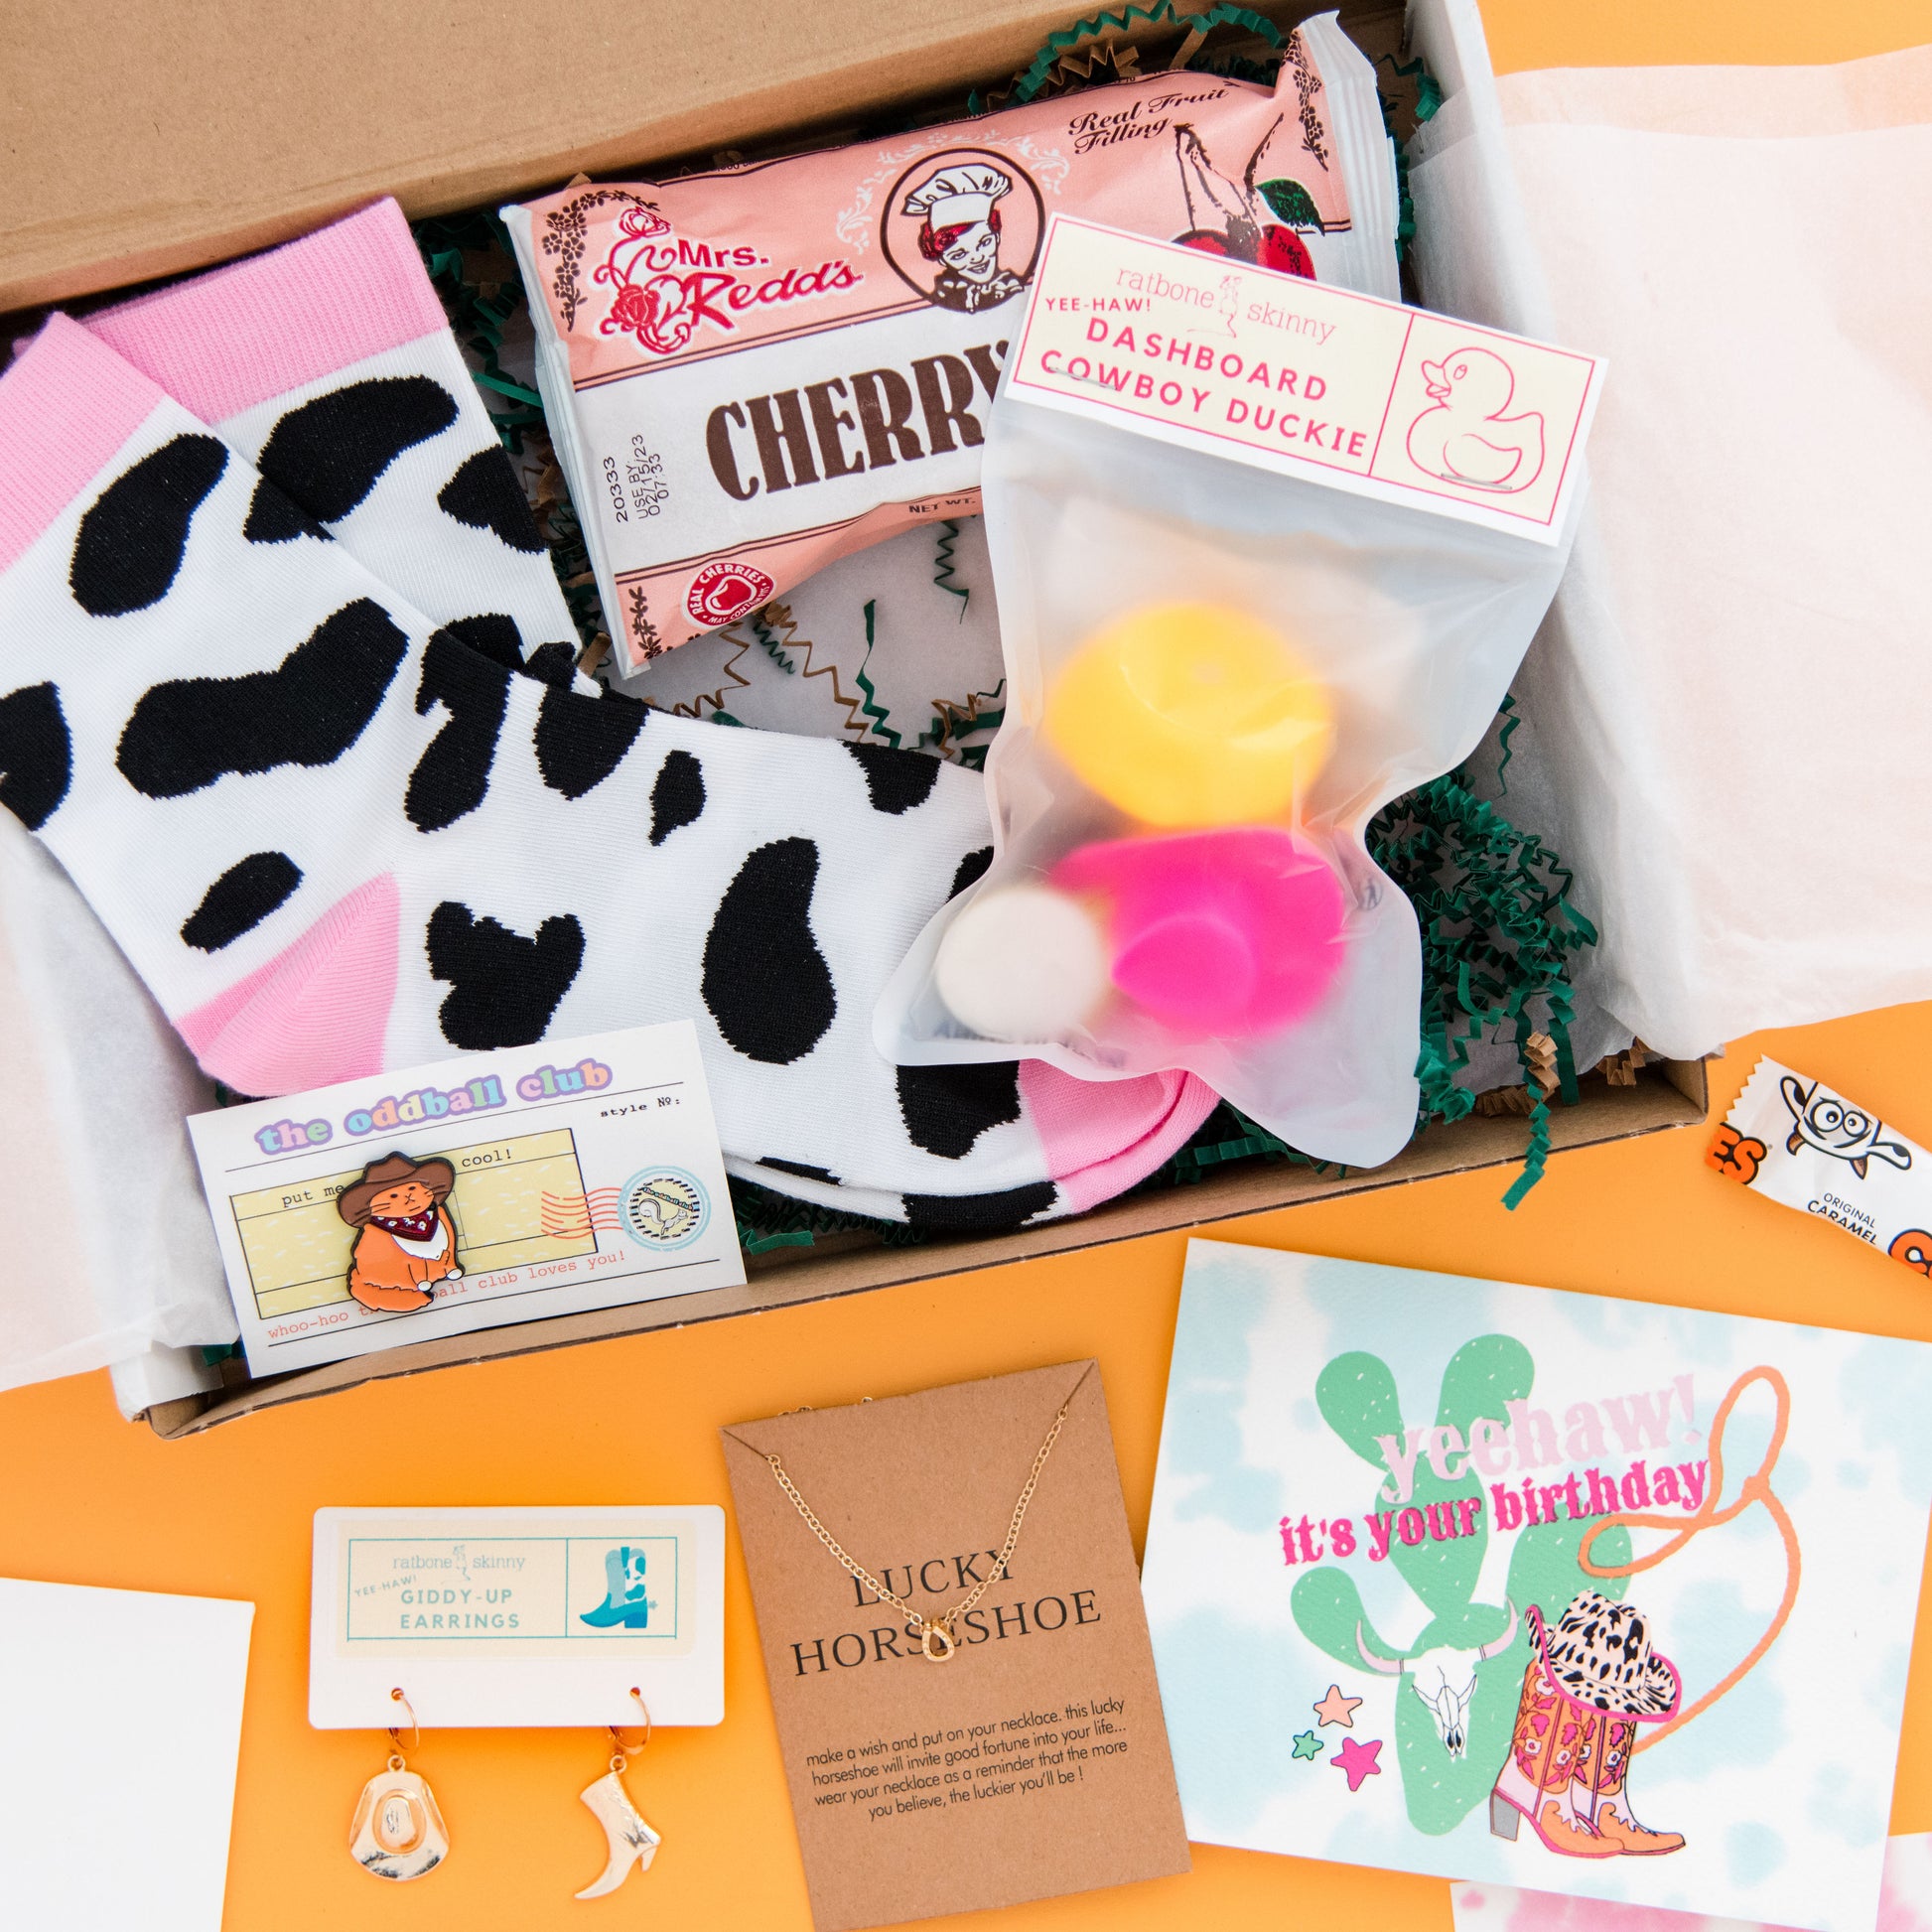 Get ready for the Wild West with our Cowboy Themed Subscription Box! Featuring a Dashboard Duckie for your car, Yeehaw Greeting Card, Cow Boy Hat Earrings, Lucky Horseshoe Necklace, and a Cat with Bandana and Cowboy Hat Enamel Pin. Perfect for any cowboy or cowgirl at heart. Subscribe today and join the posse!